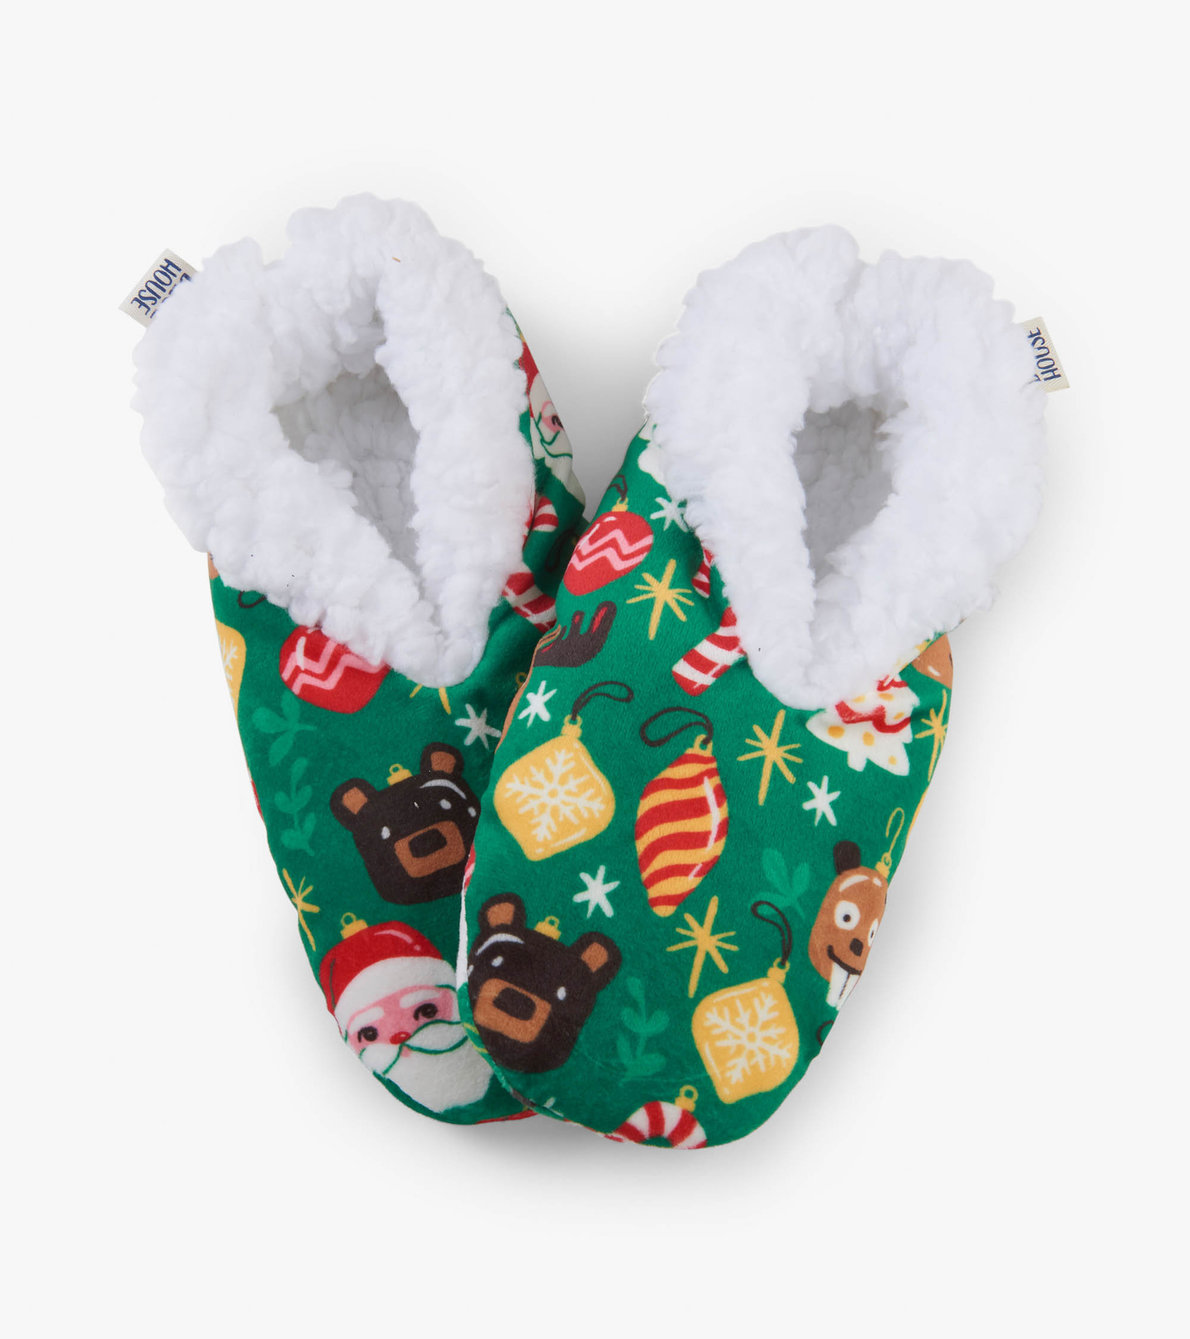 View larger image of Holiday Ornaments Women's Warm and Cozy Slippers